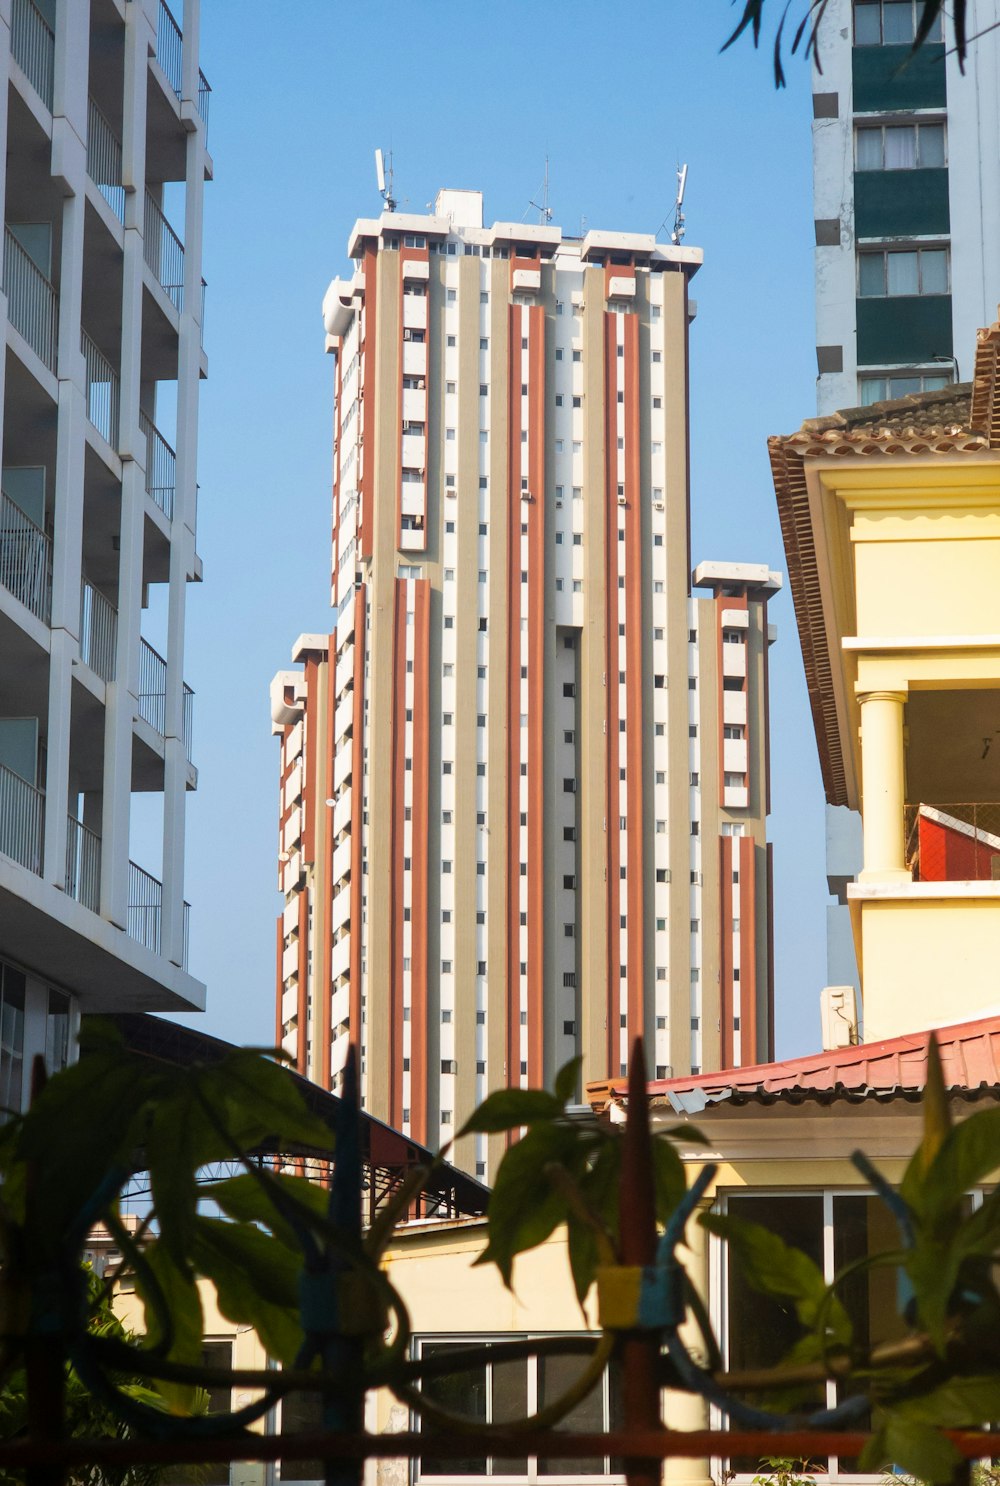 a view of a tall building from across the street